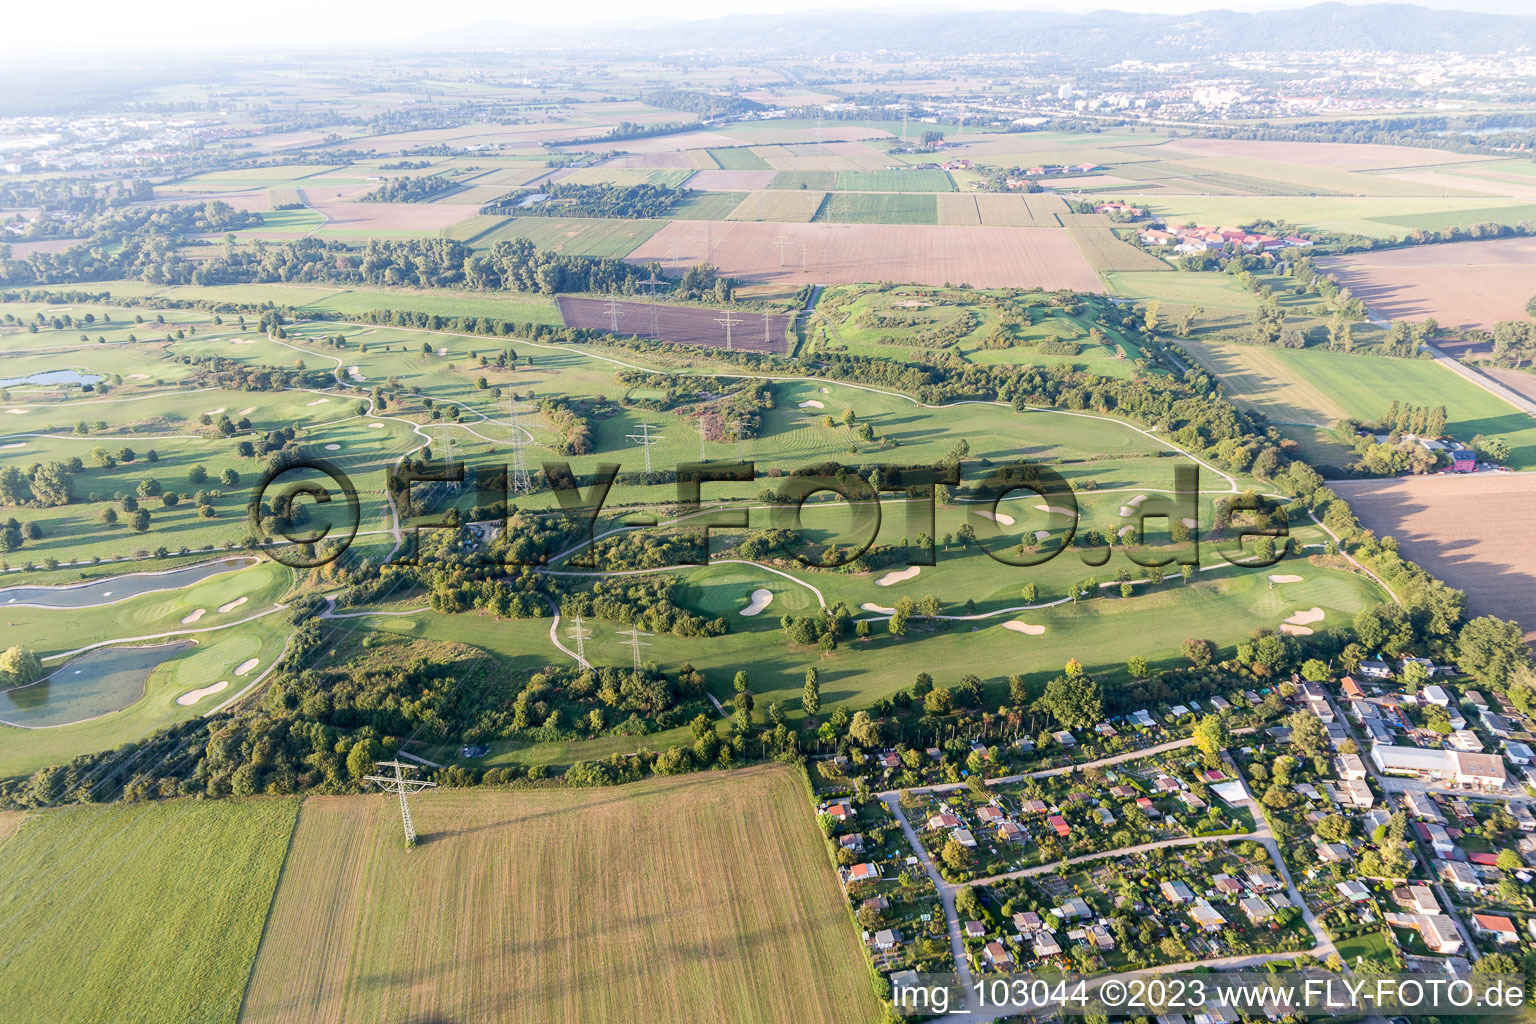 Aerial view of Heddesheim in the state Baden-Wuerttemberg, Germany